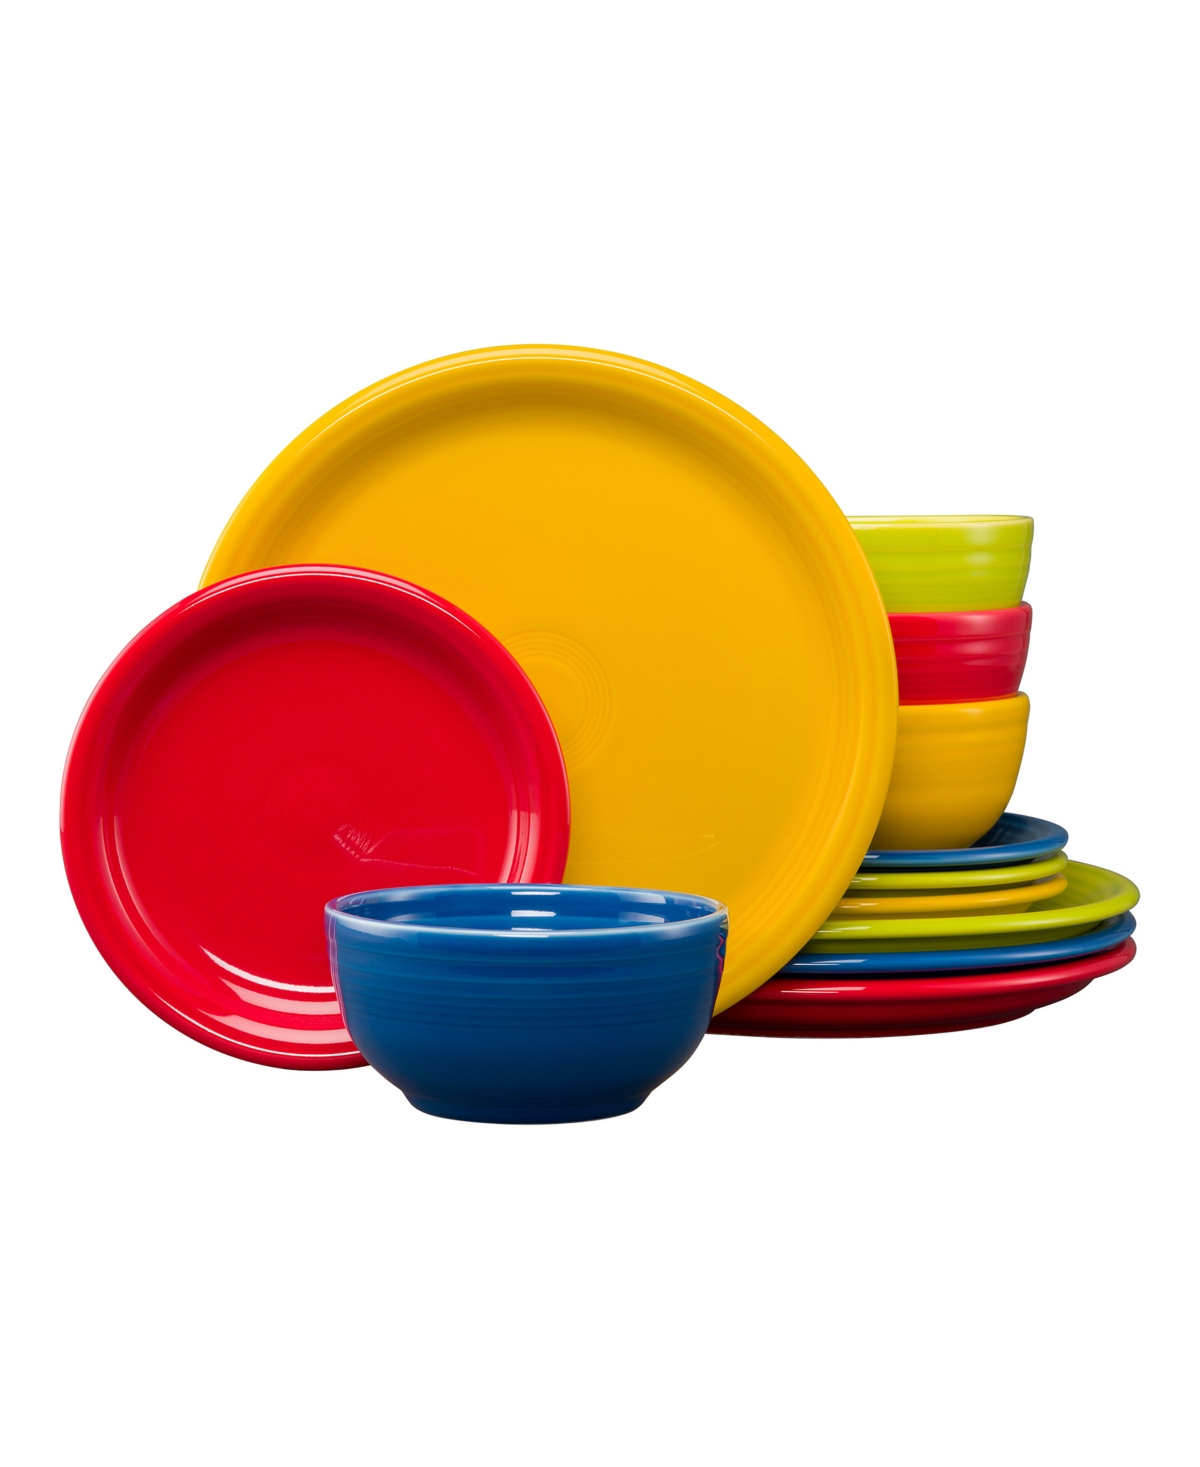 Mixed Bright Colors Bistro 12-Pc. Dinnerware Set, Service for 4 - Mixed Bright Colors